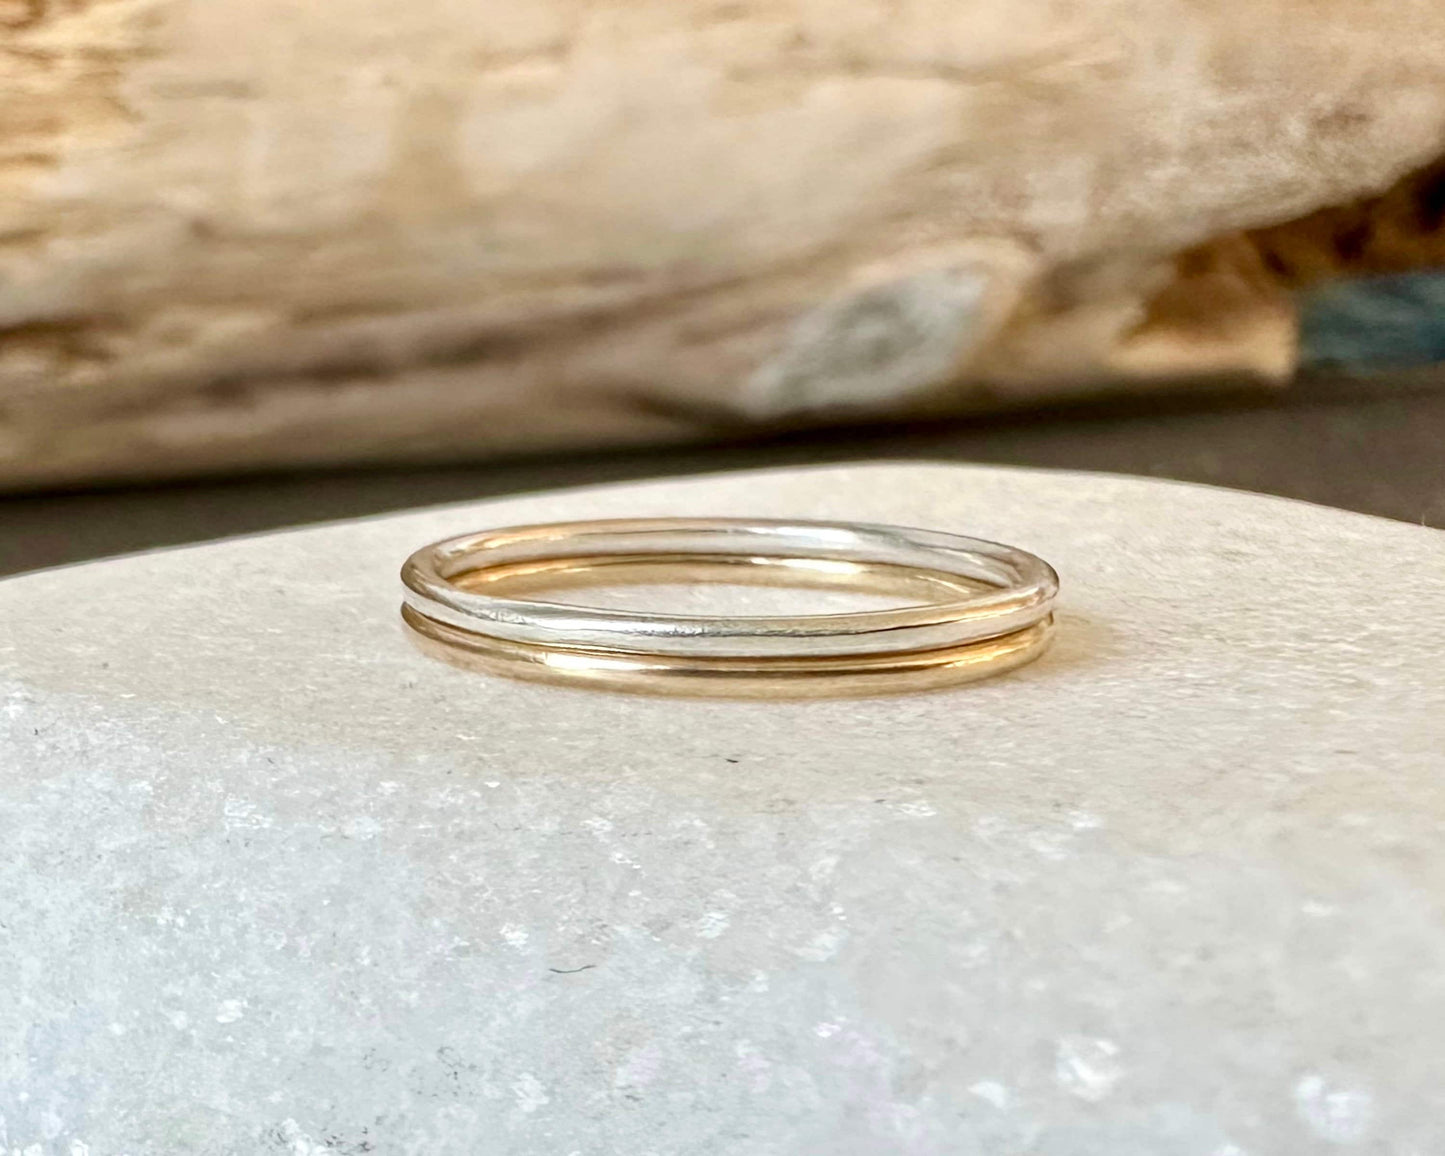 925 Sterling Silver Ring, 1.2mm, 1.5mm, 1.8mm, Plain, Smooth and Shiny Silver Ring, Minimalist Ring Band, Handmade Stacking Ring, Thin Ring